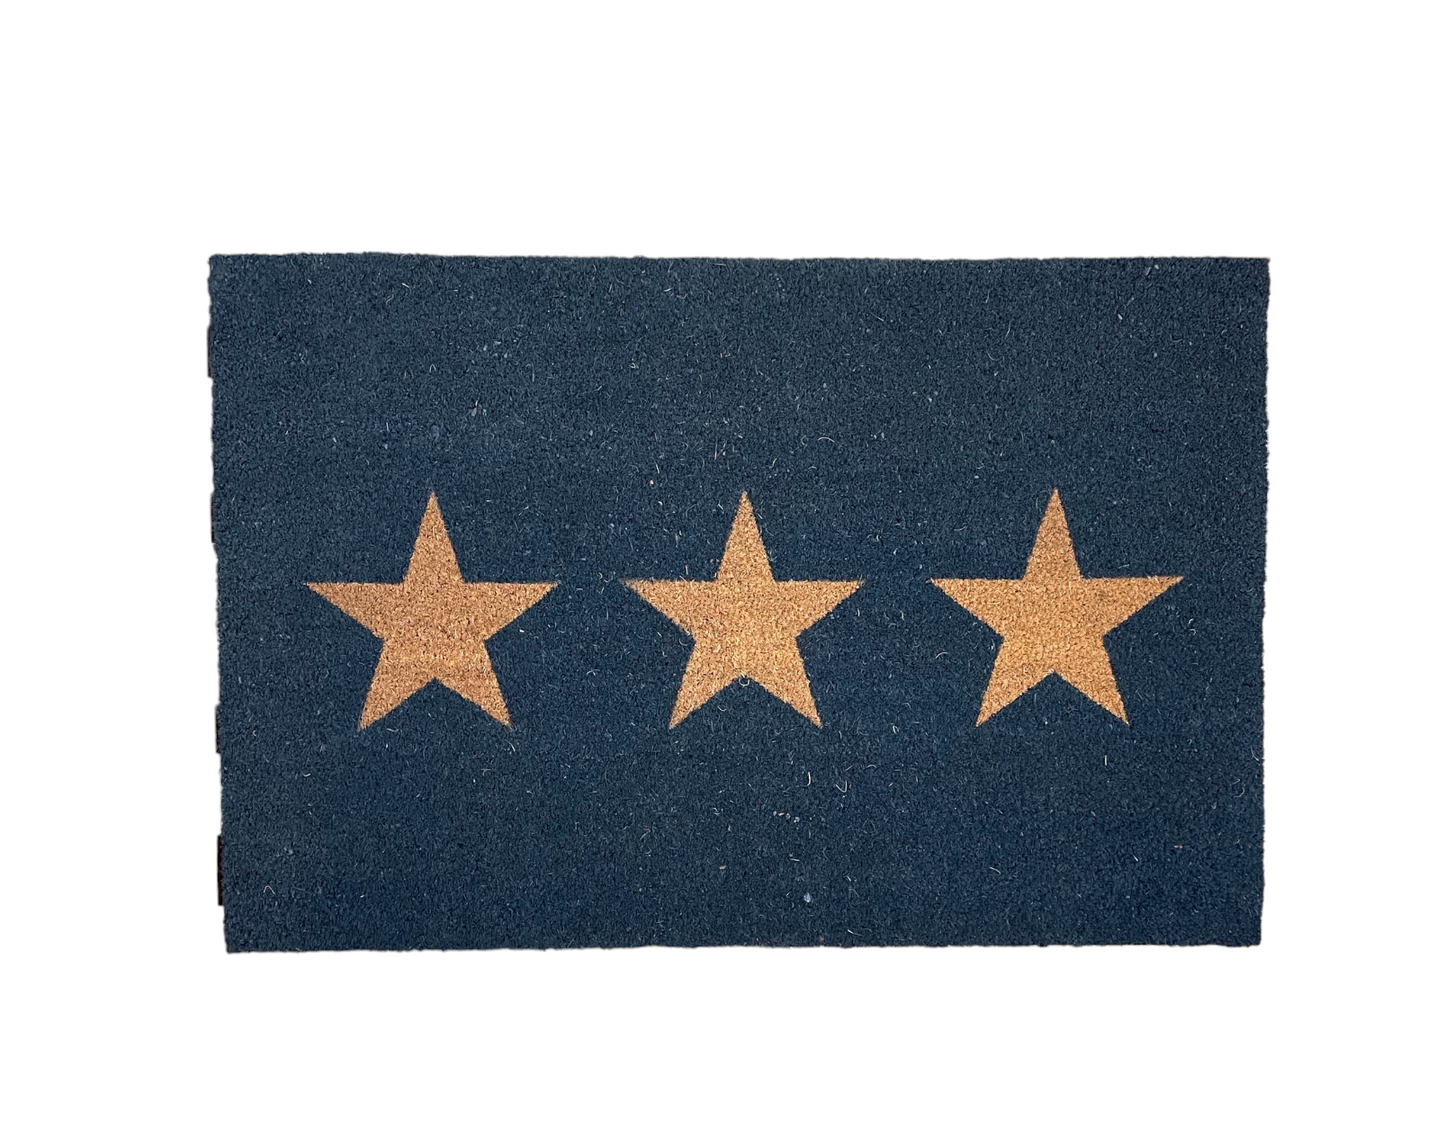 Large 3 Star Doormat in Charcoal